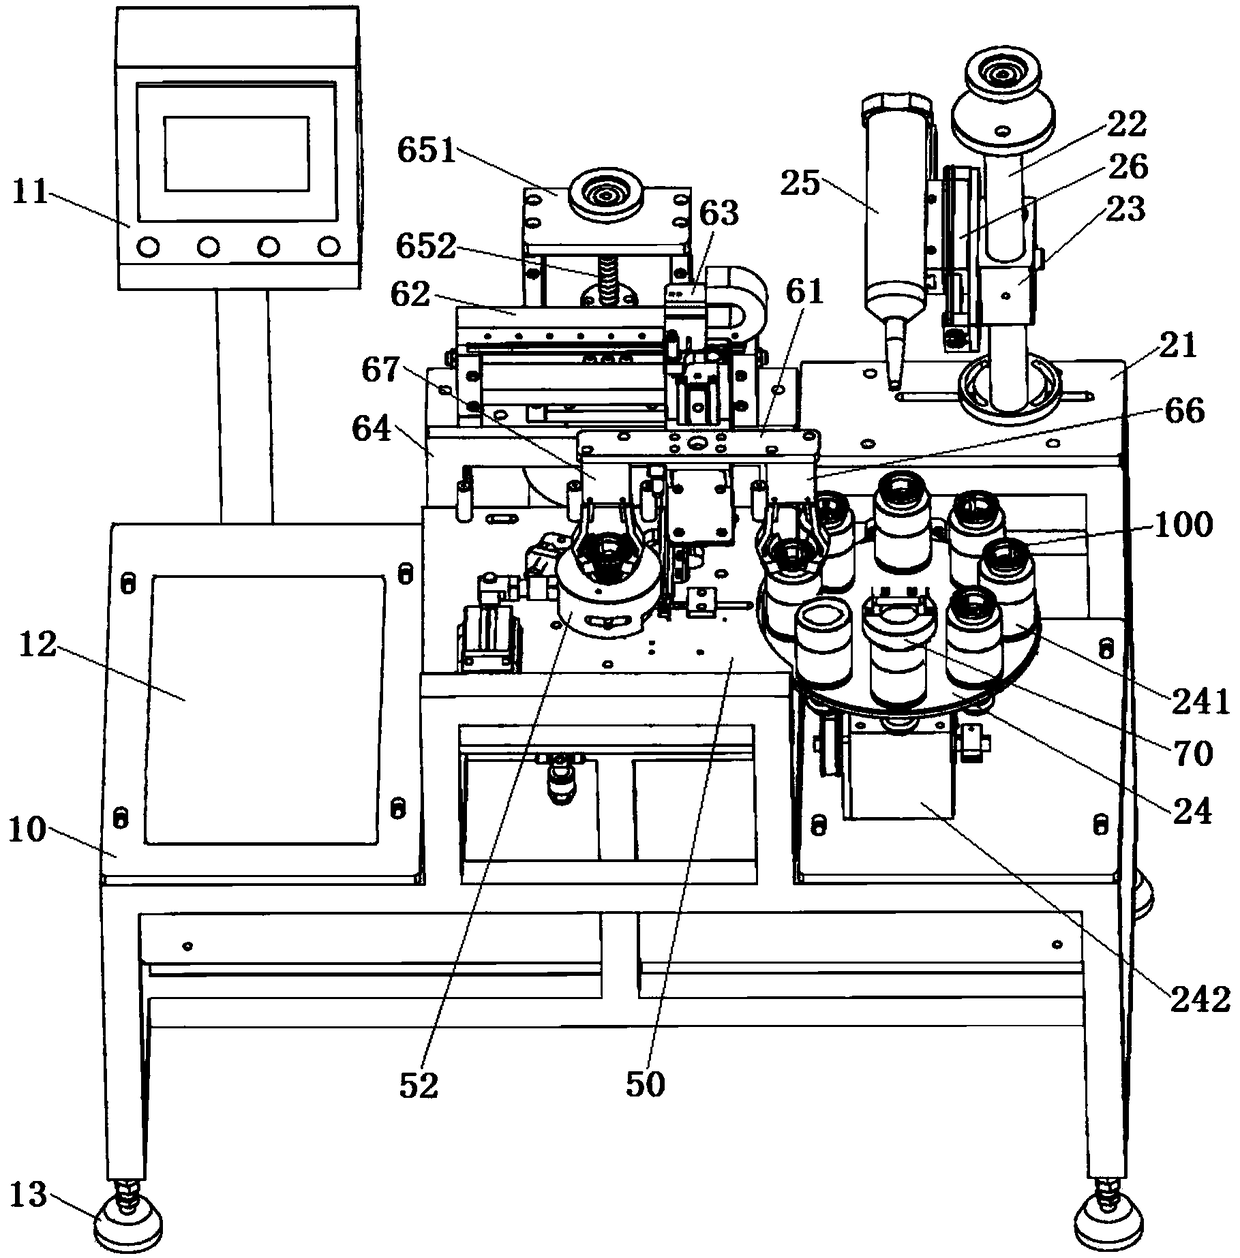 An automatic feeding and labeling device